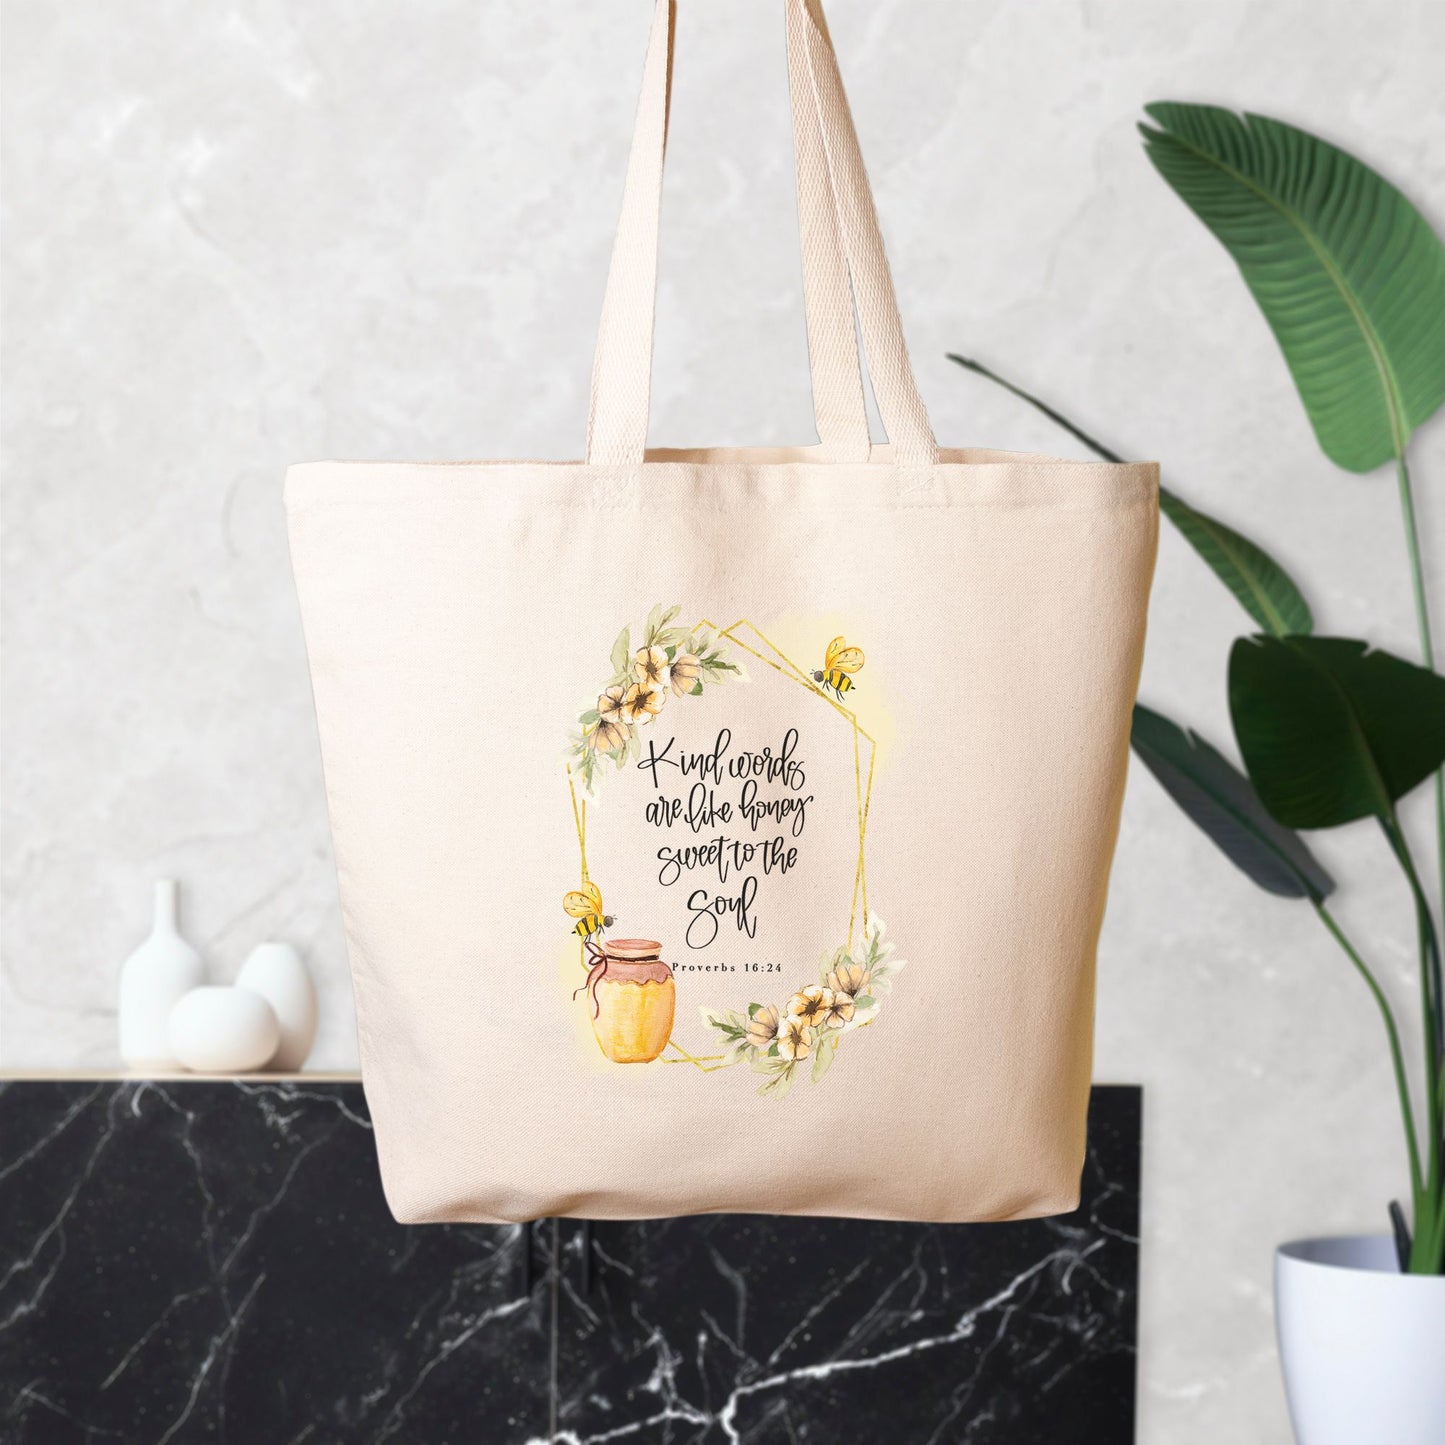 Proverbs 16:24 Cotton Canvas Oversized Tote